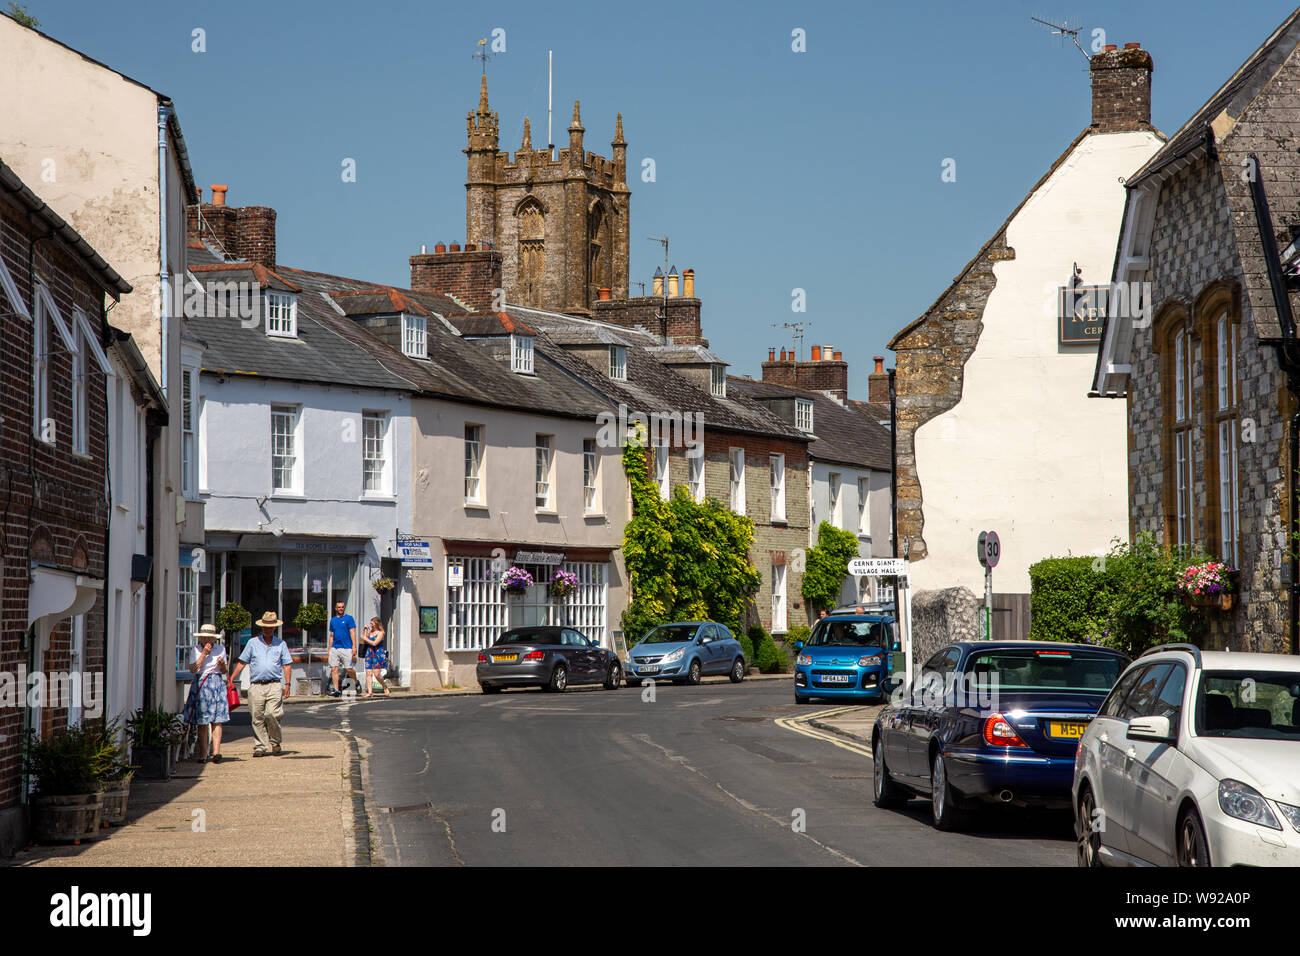 Cerne Abbas, England, UK - June 29, 2019: Pedestrians walk past traditional cottages on Long Street in the picturesque village of Cerne Abbas in Dorse Stock Photo